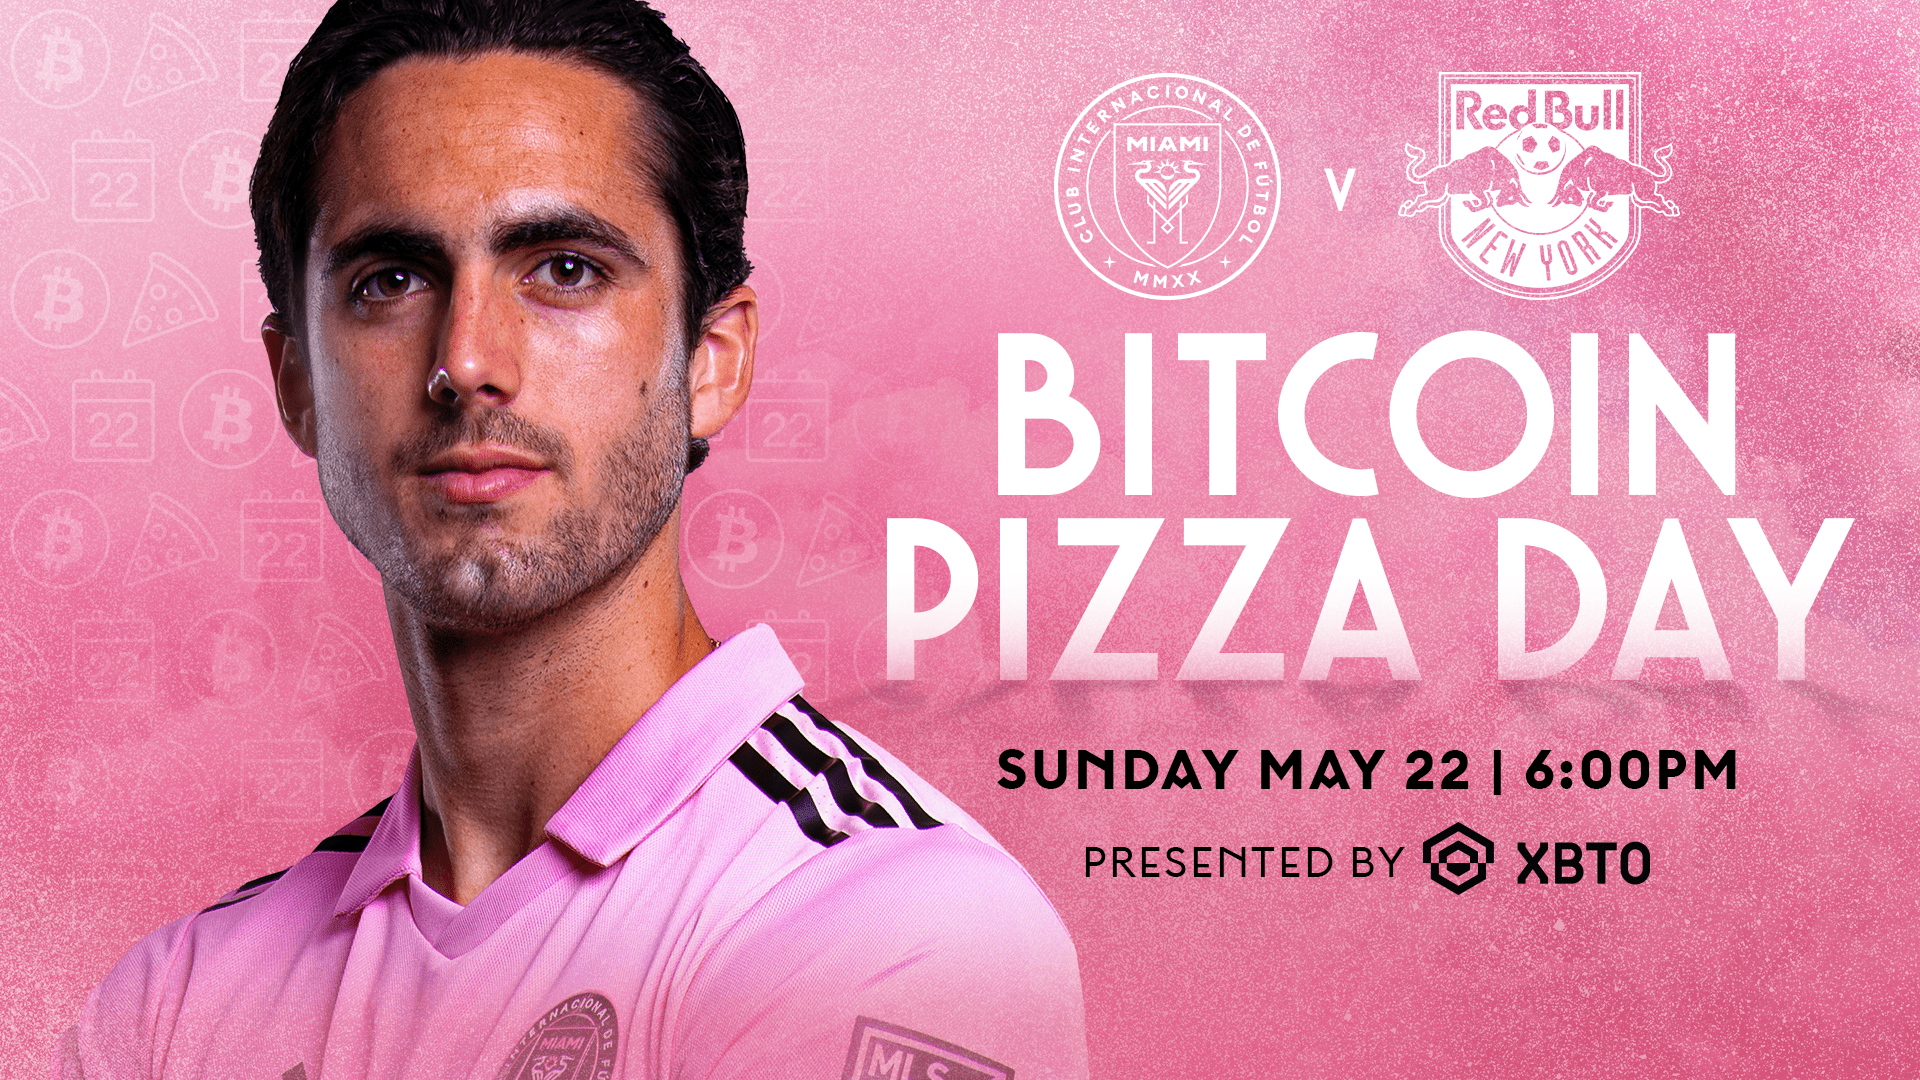 Inter Miami CF to Host Bitcoin Pizza Day presented by XBTO at DRV PNK Stadium on May 22